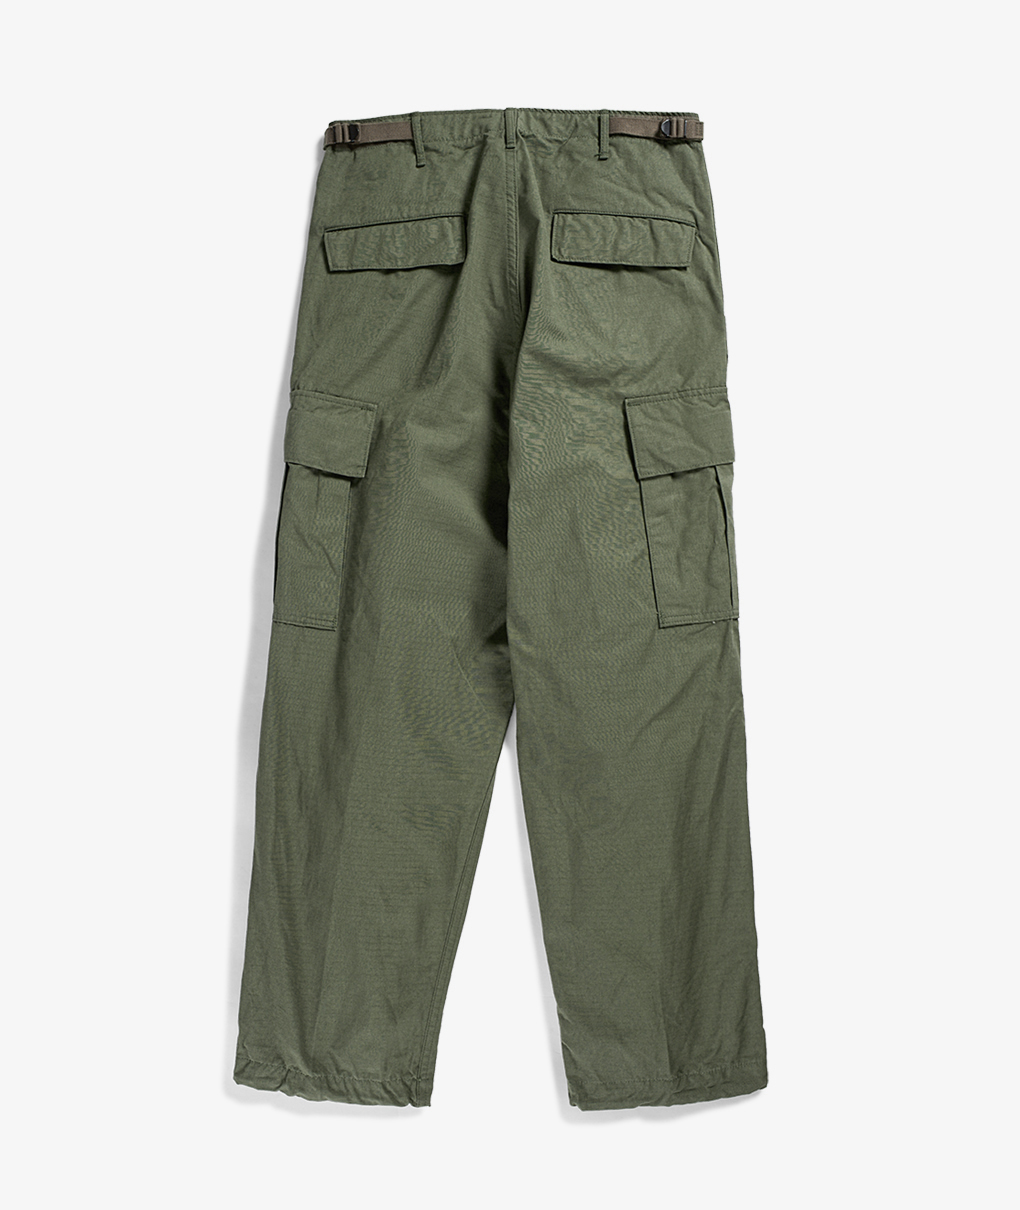 Norse Store | Shipping Worldwide - Orslow Ripstop Cargo Pant - Army Green